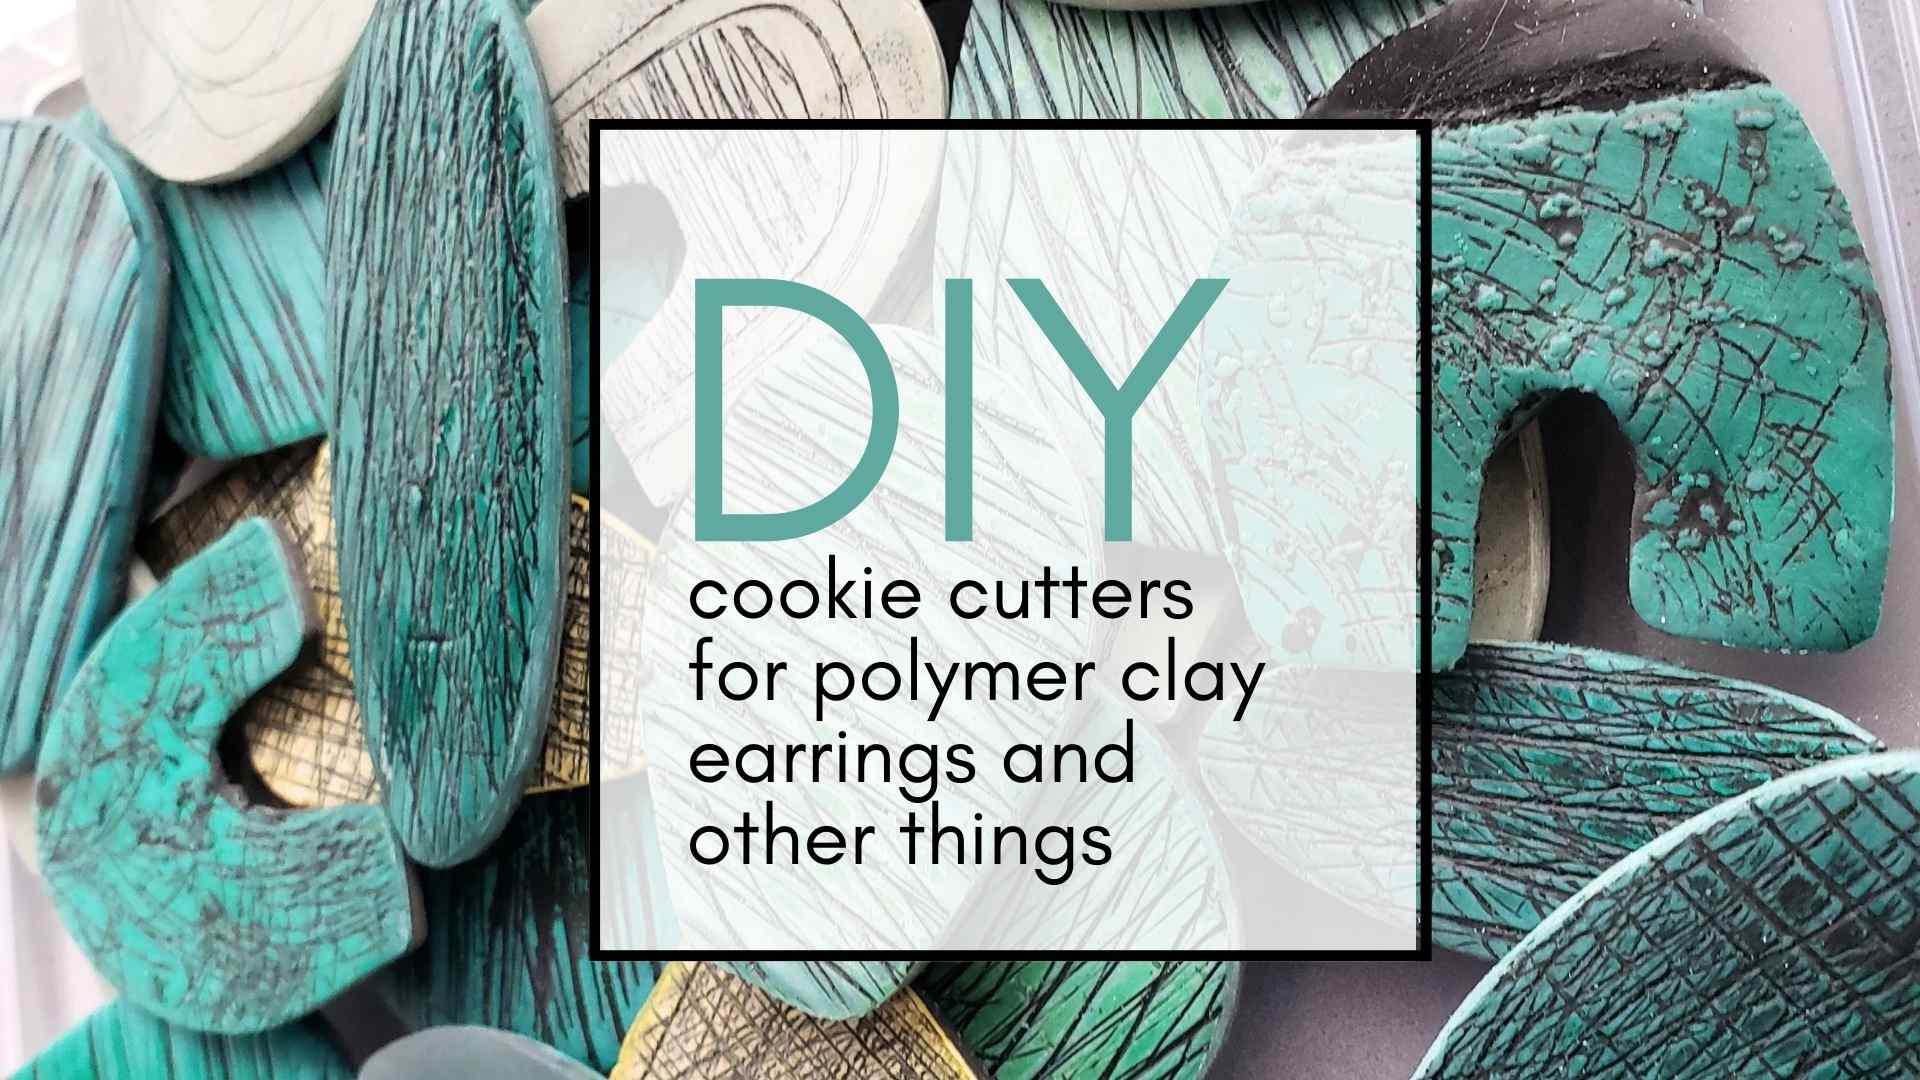 I show polymer clay jewelry makers how to upcycle metal cookie cutters and create new, exciting, unique shapes to make jewelry.